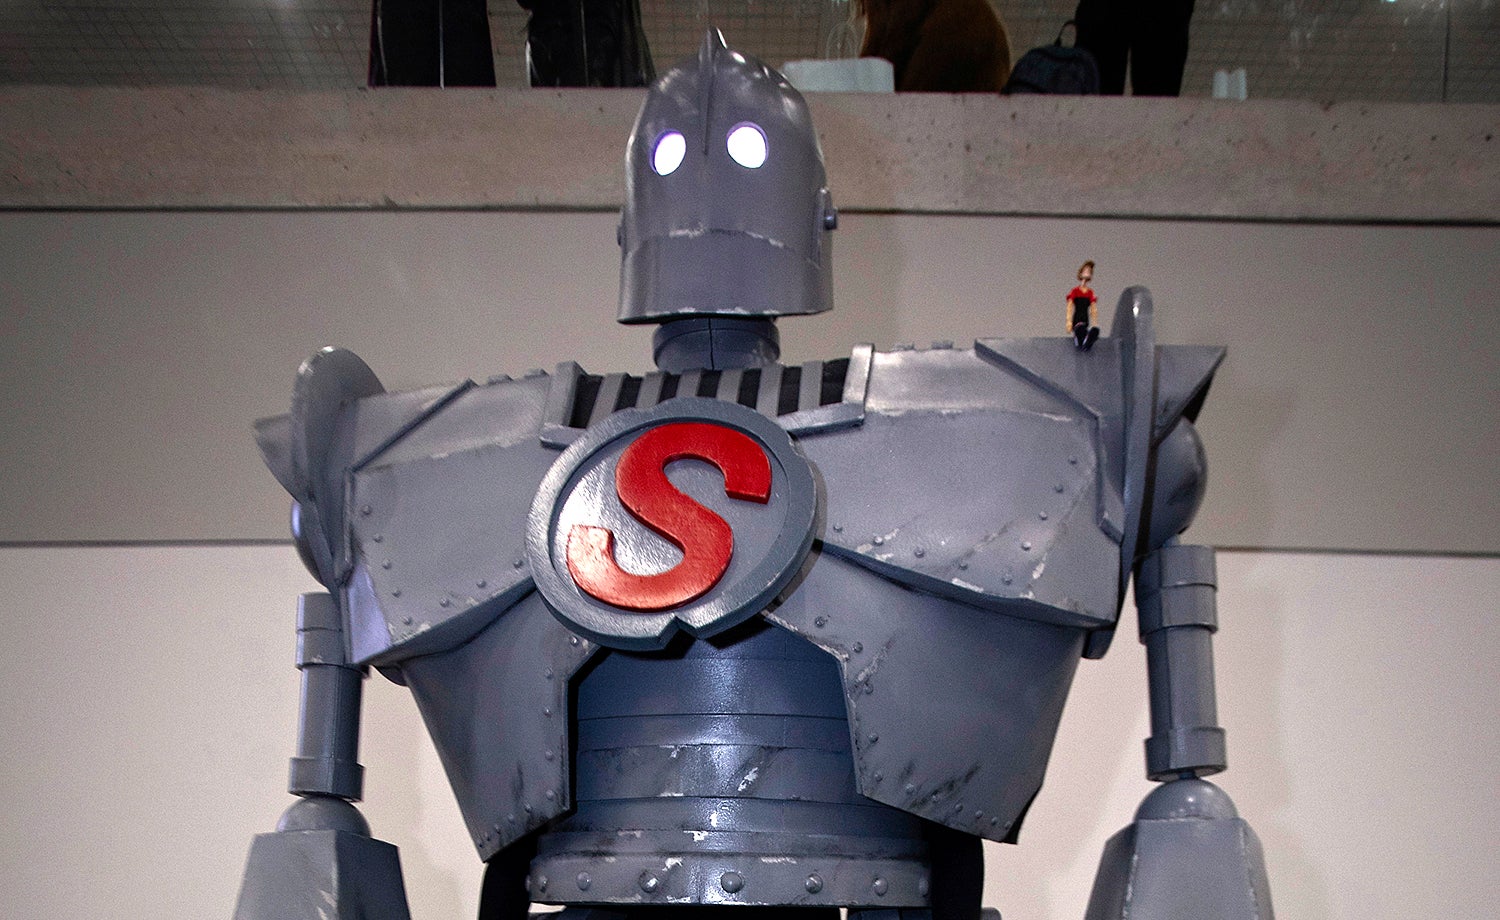 The Iron Giant Cosplay at New York Comic Con 2019